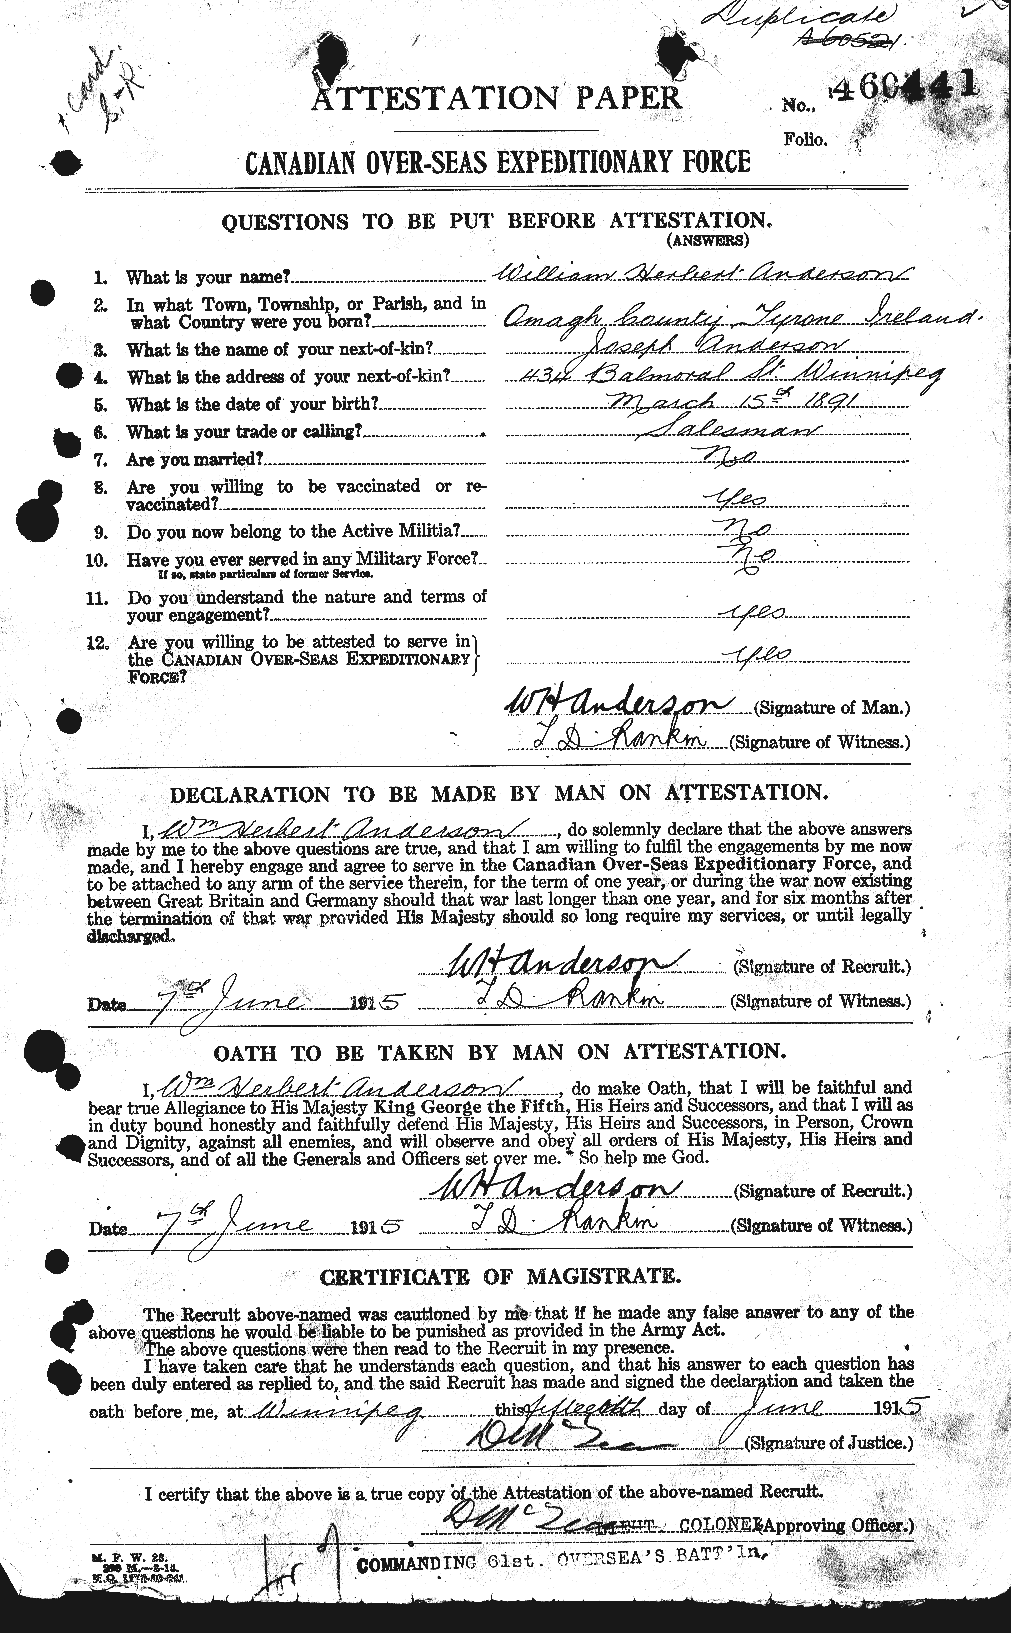 Personnel Records of the First World War - CEF 210806a